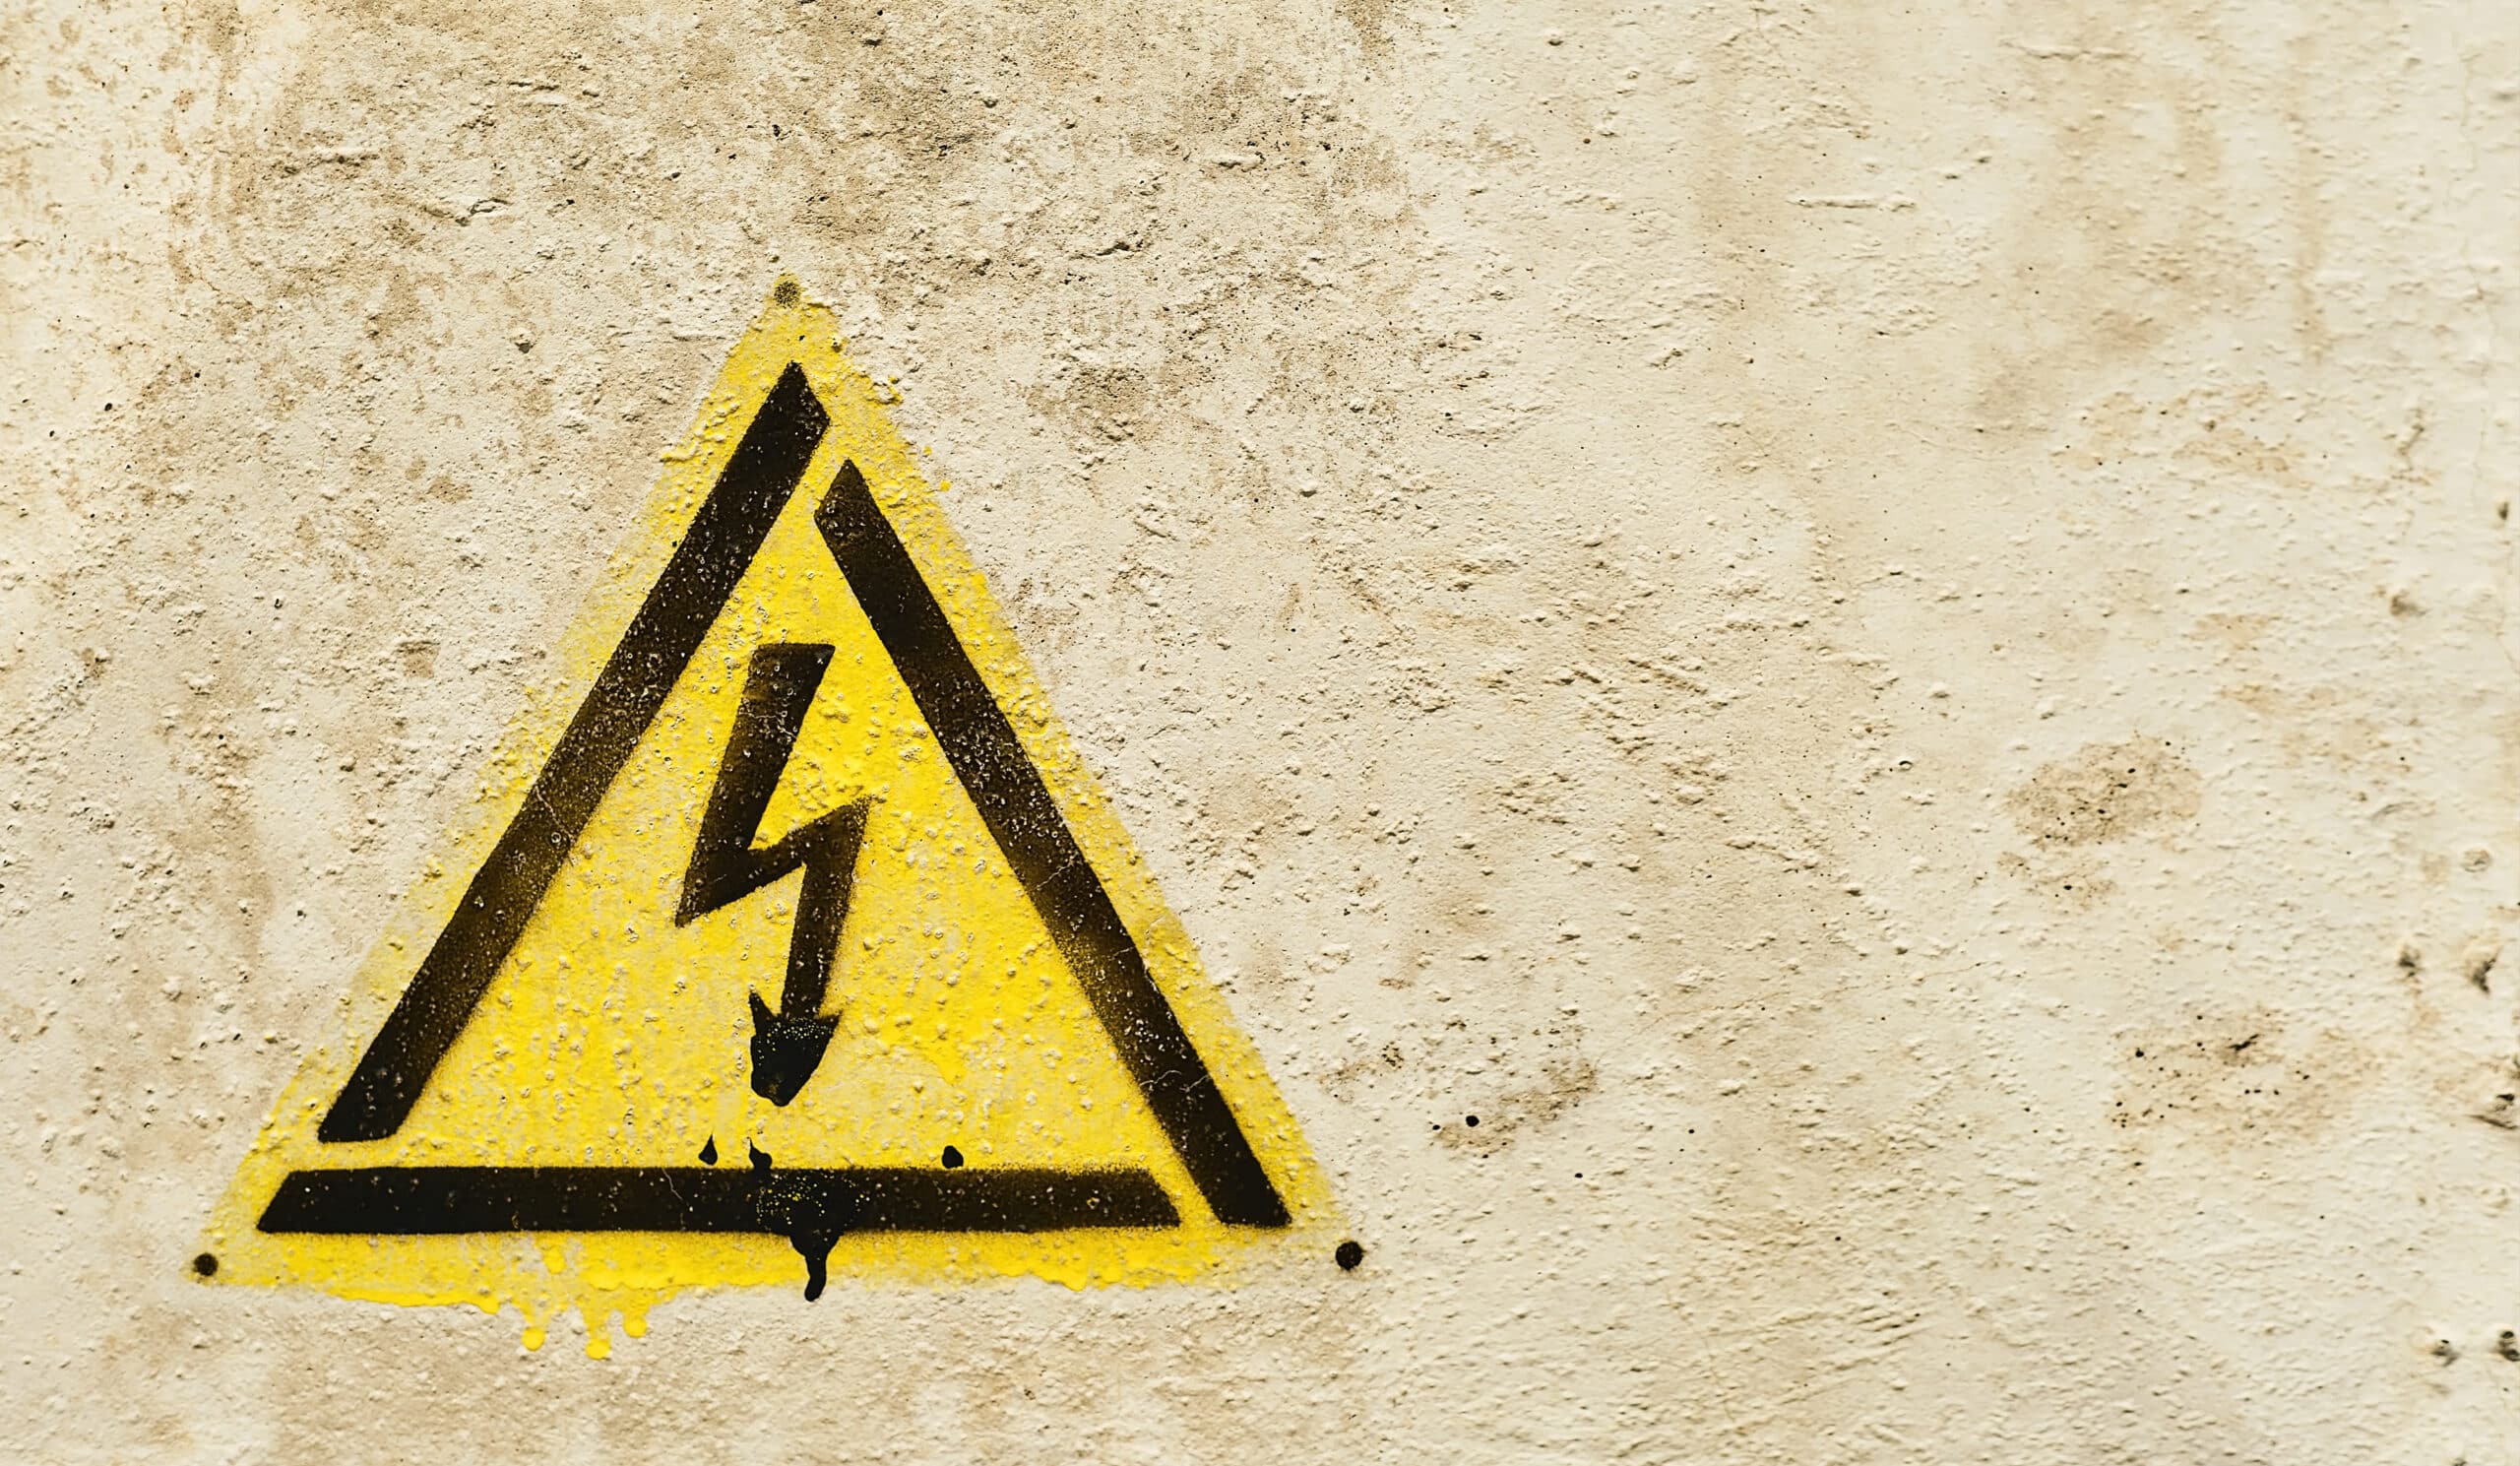 Danger sign of high voltage electricity. Yellow triangle hazard